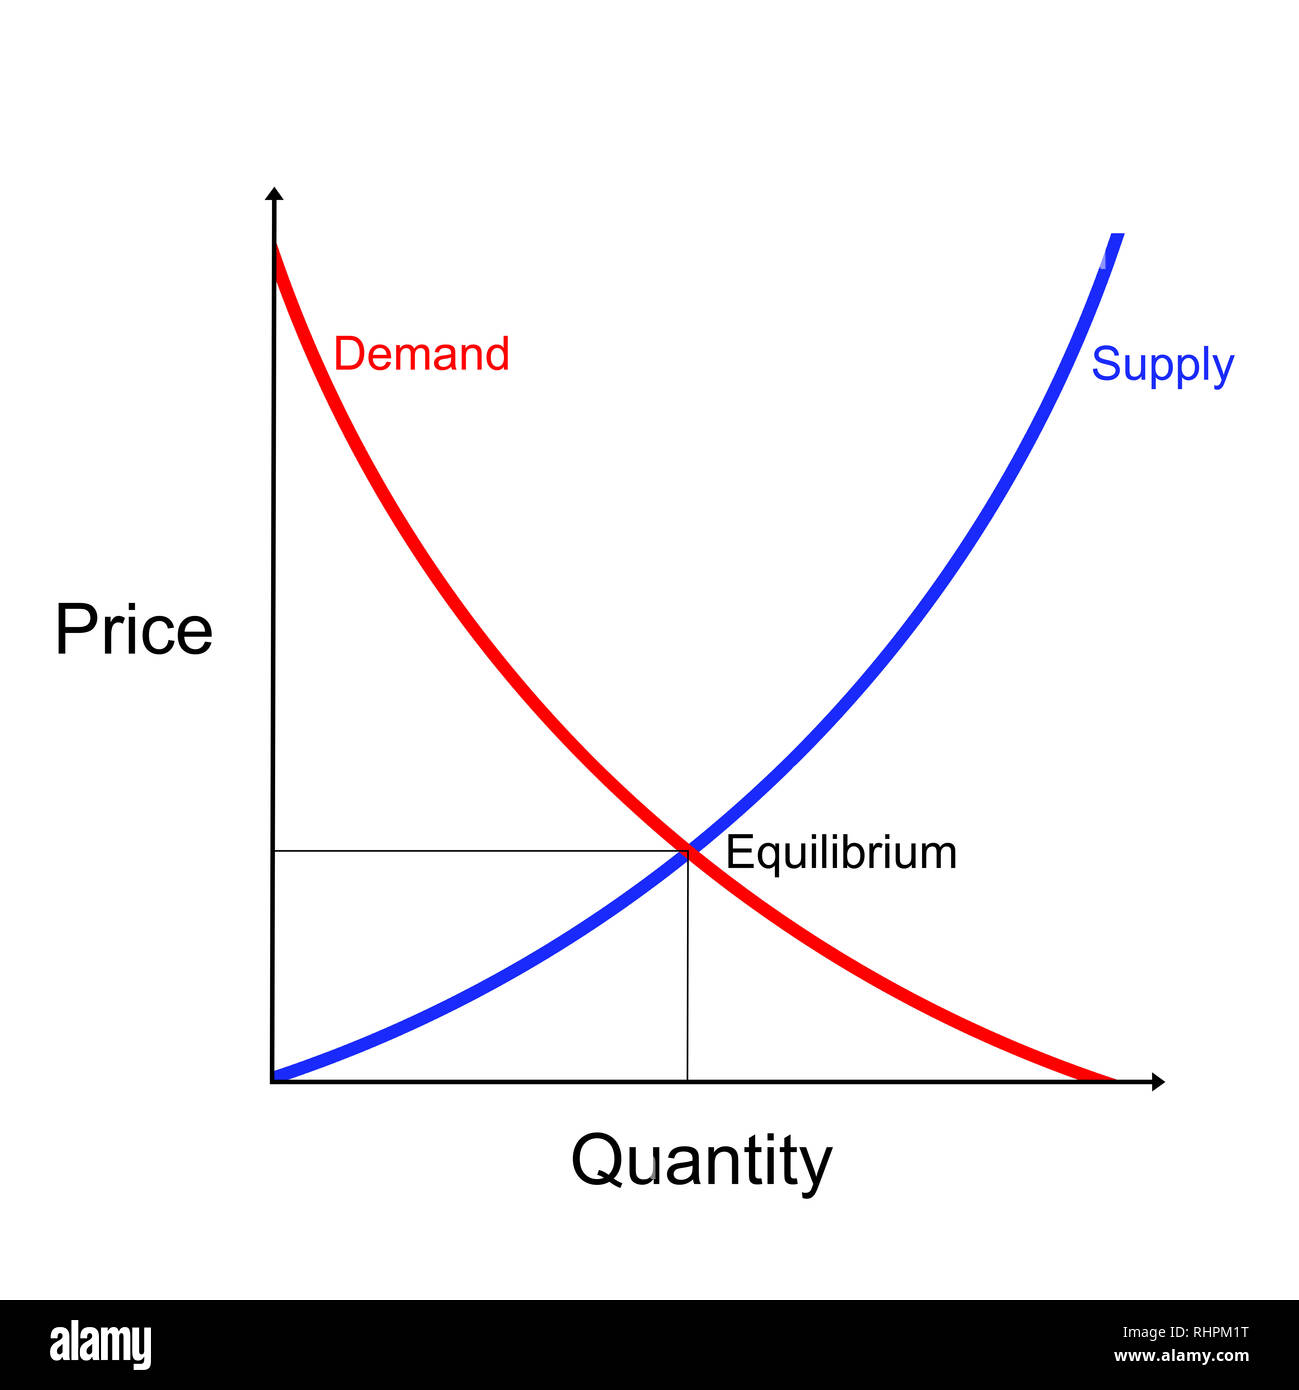 Supply and demand curves diagram showing equilibrium point on white background Stock Photo